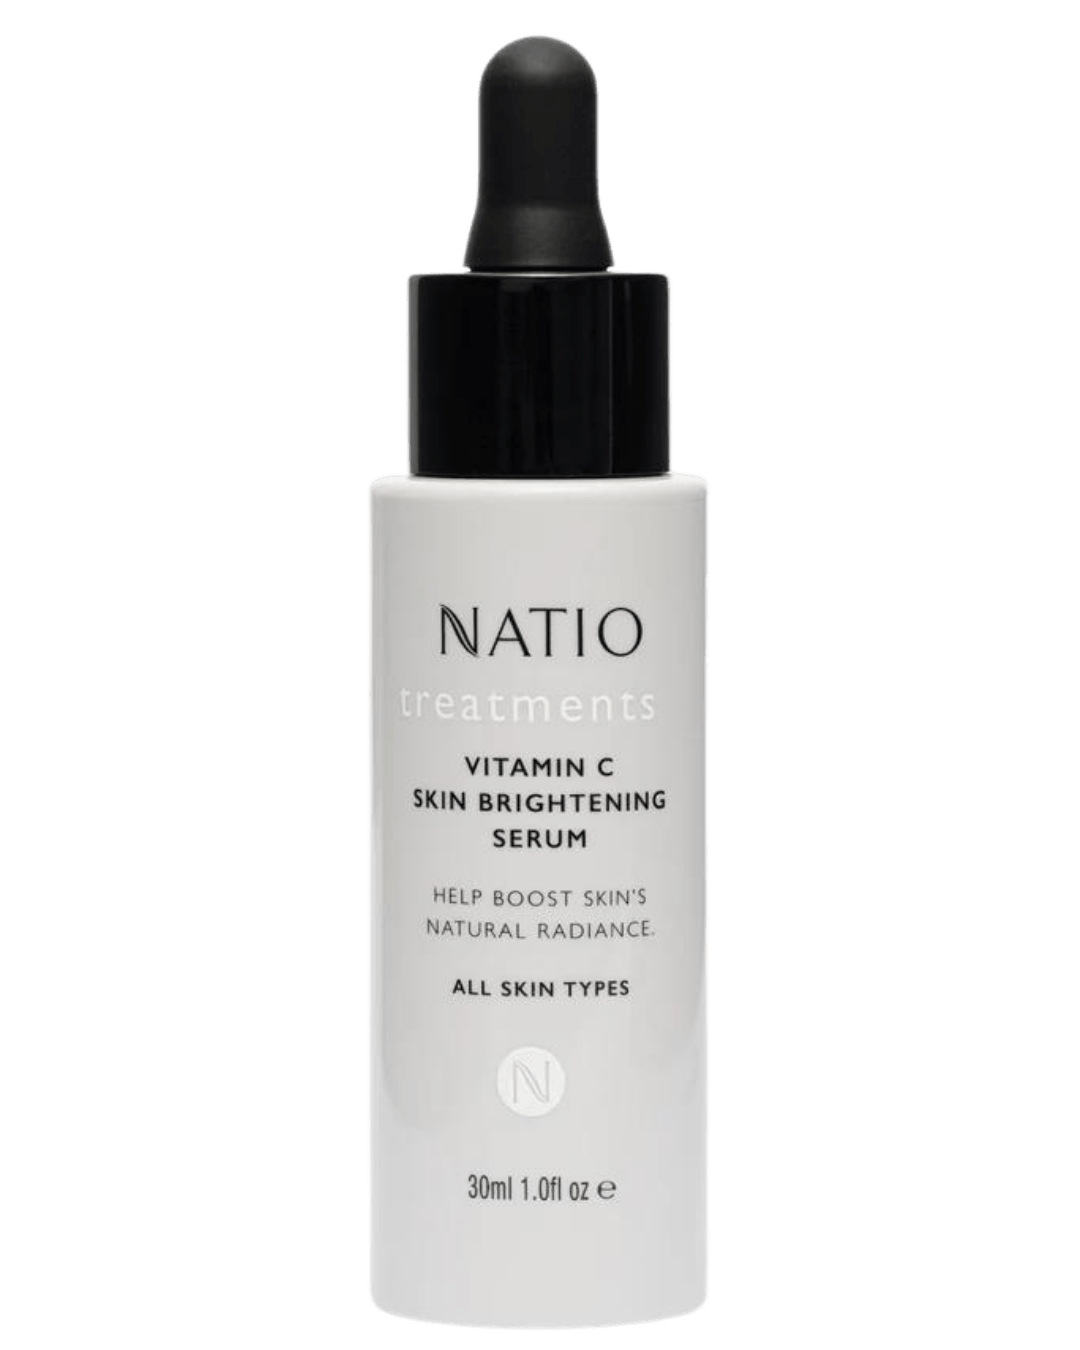 Daily Vanity Beauty Awards 2024 Best Skincare Natio Vitamin C Brightening Serum Voted By Beauty Experts